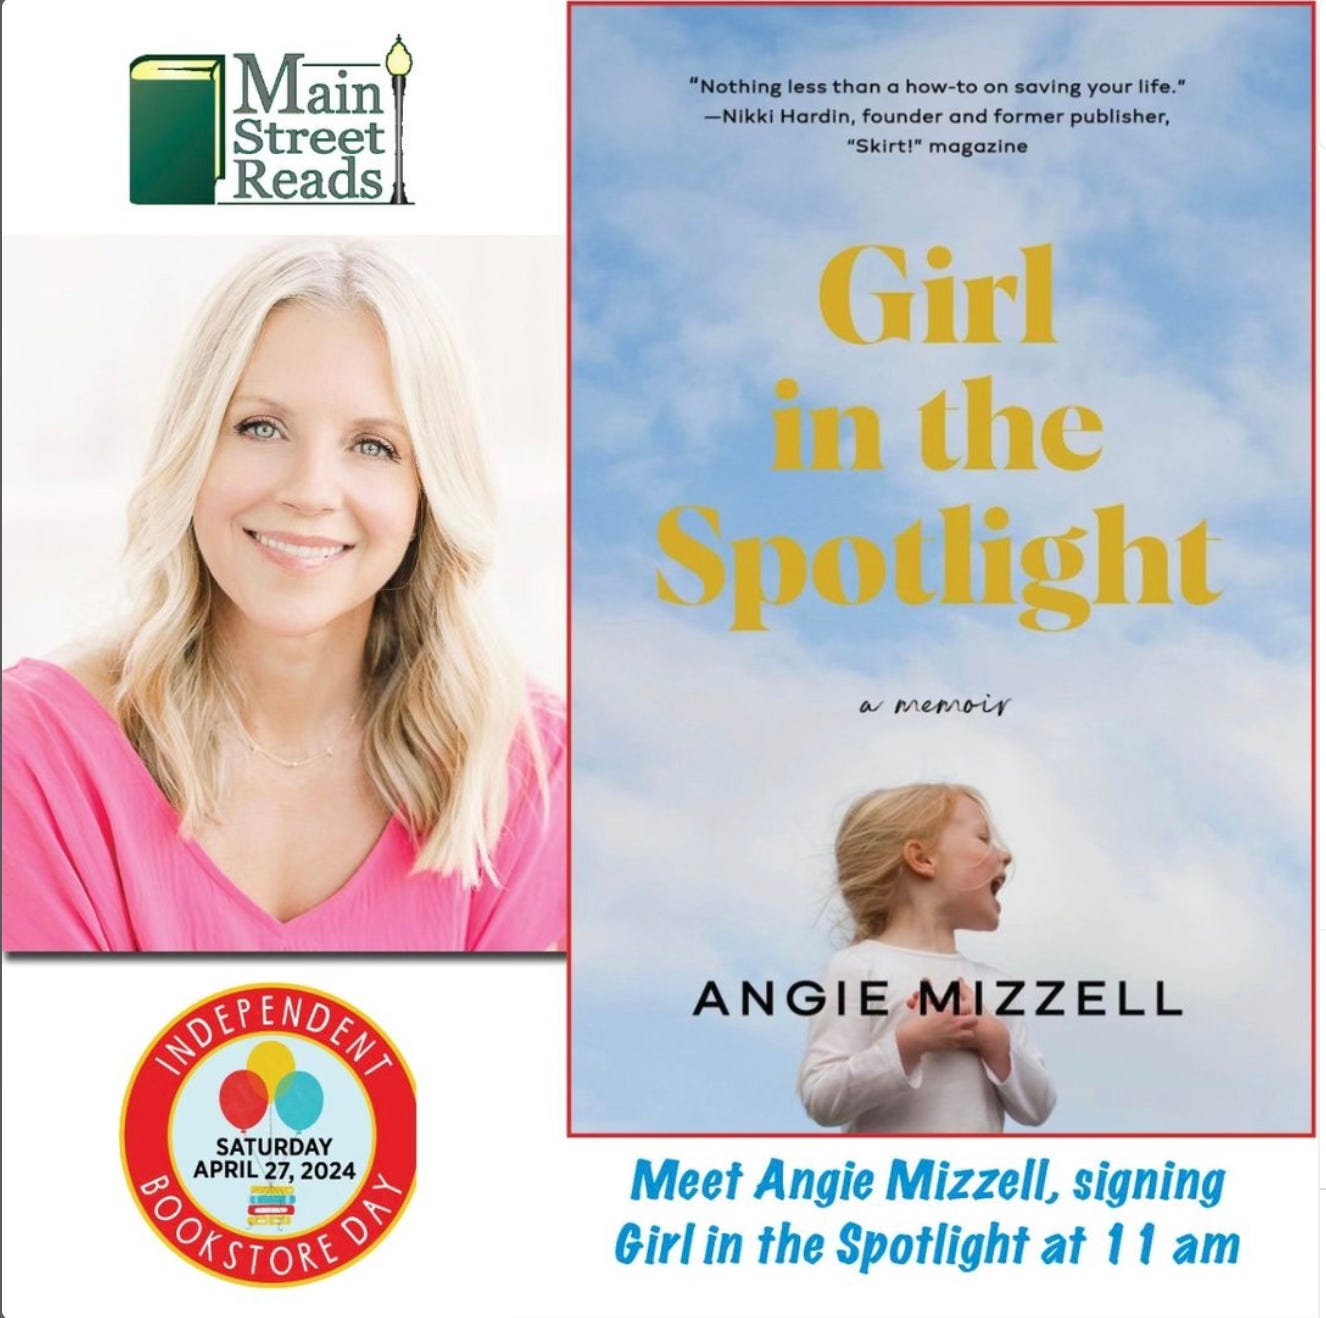 Angie Mizzell at Main Street Reads